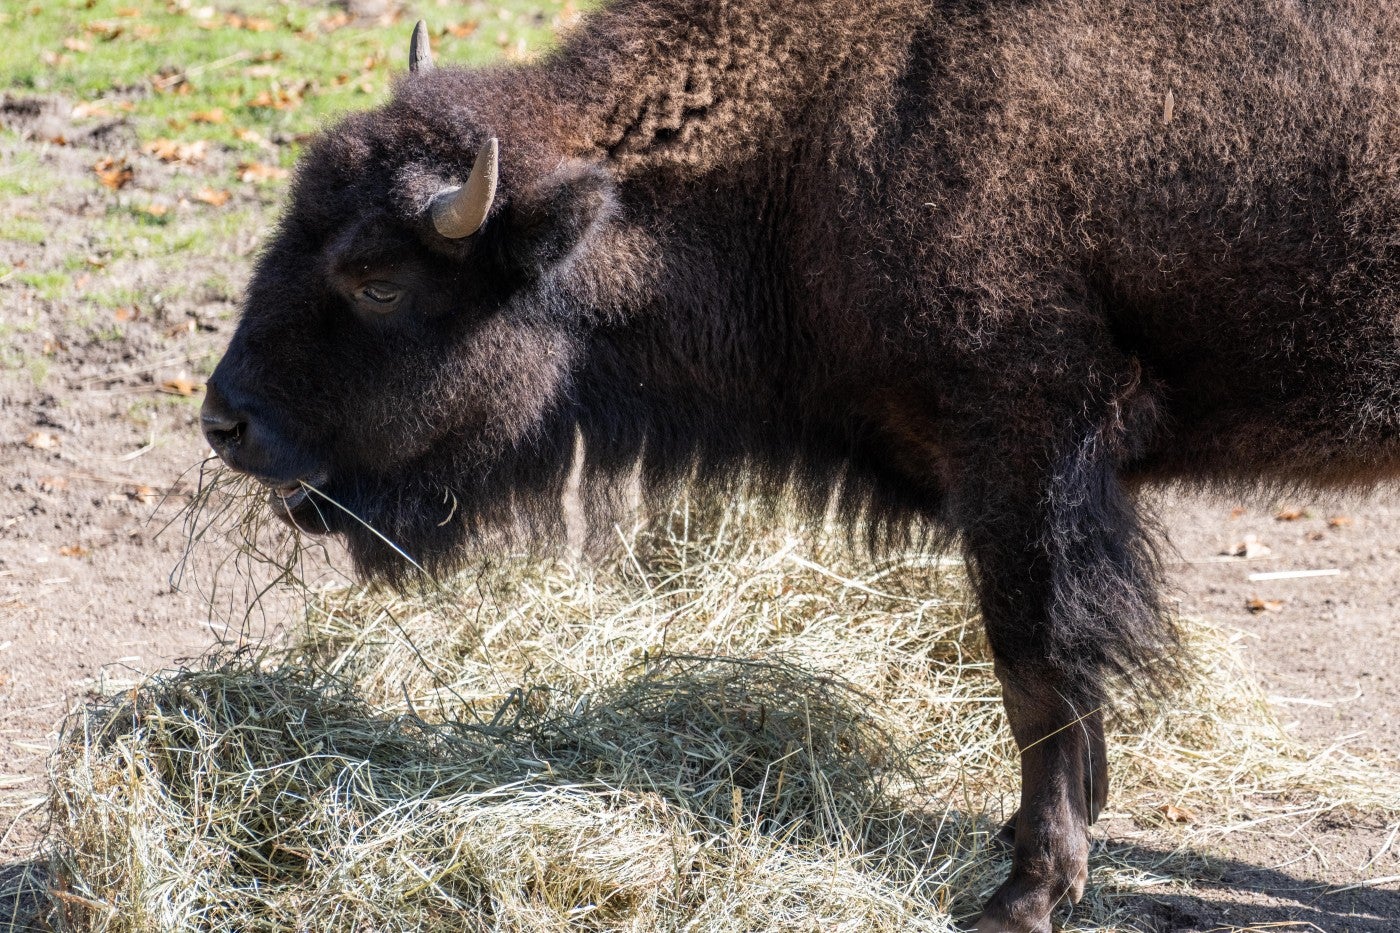 American bison Gally eats hay